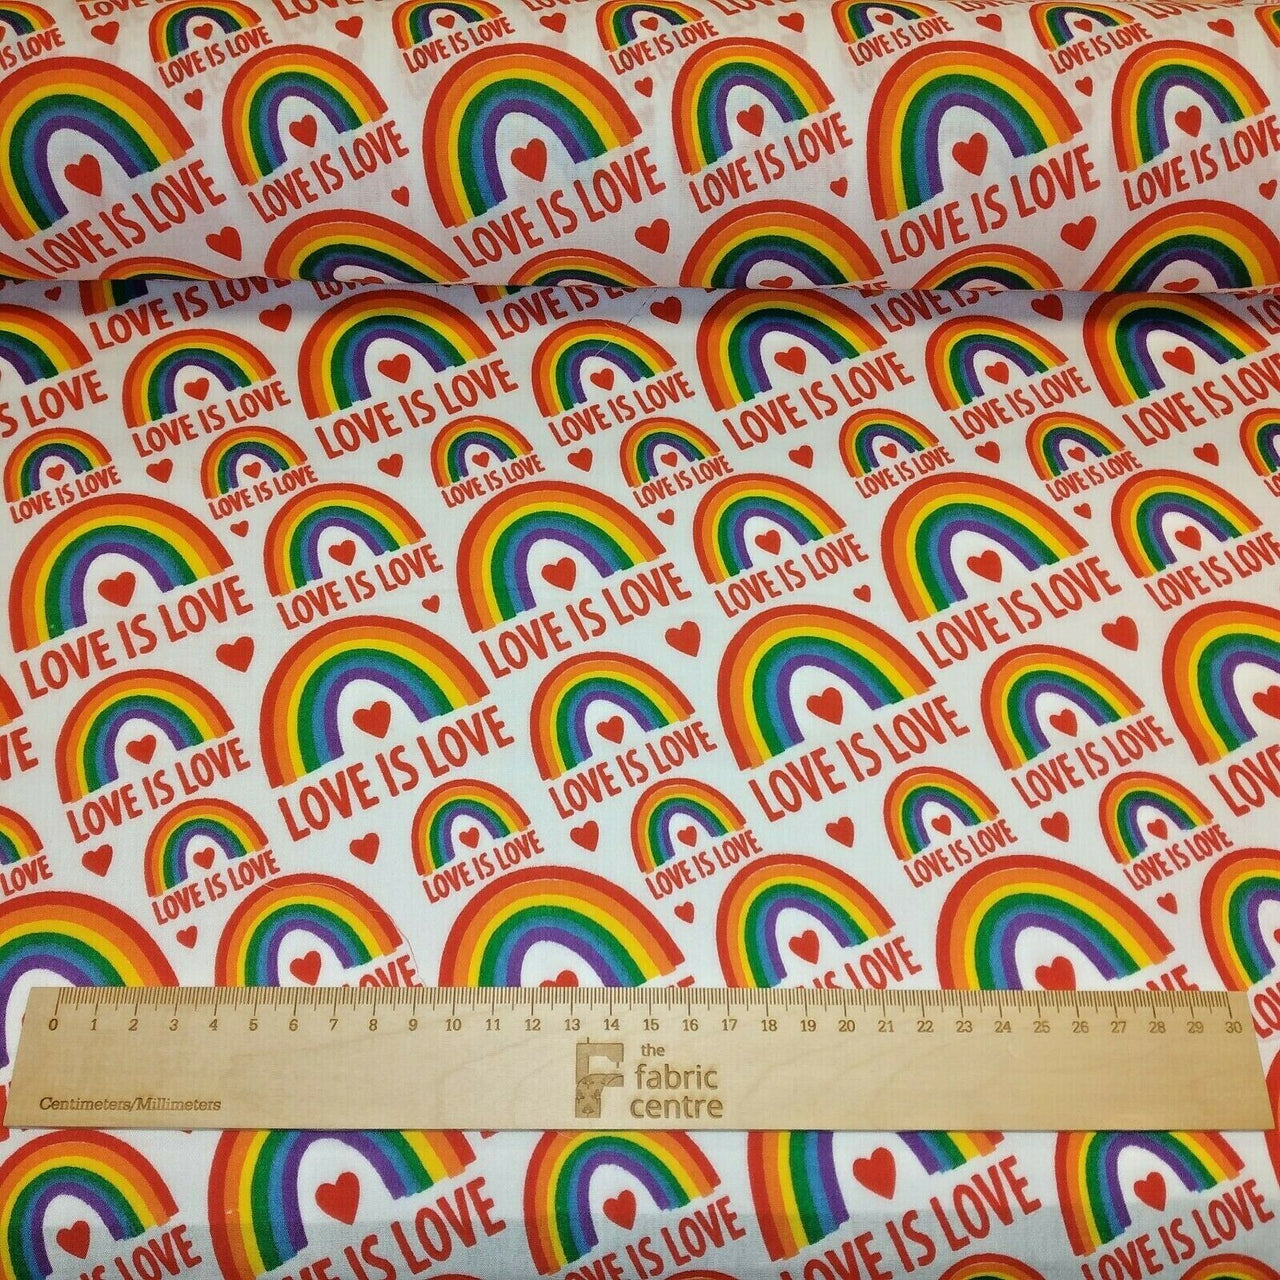 Love is Love - Rainbow Pride Printed Poly Cotton Fabric - Width 110 cm